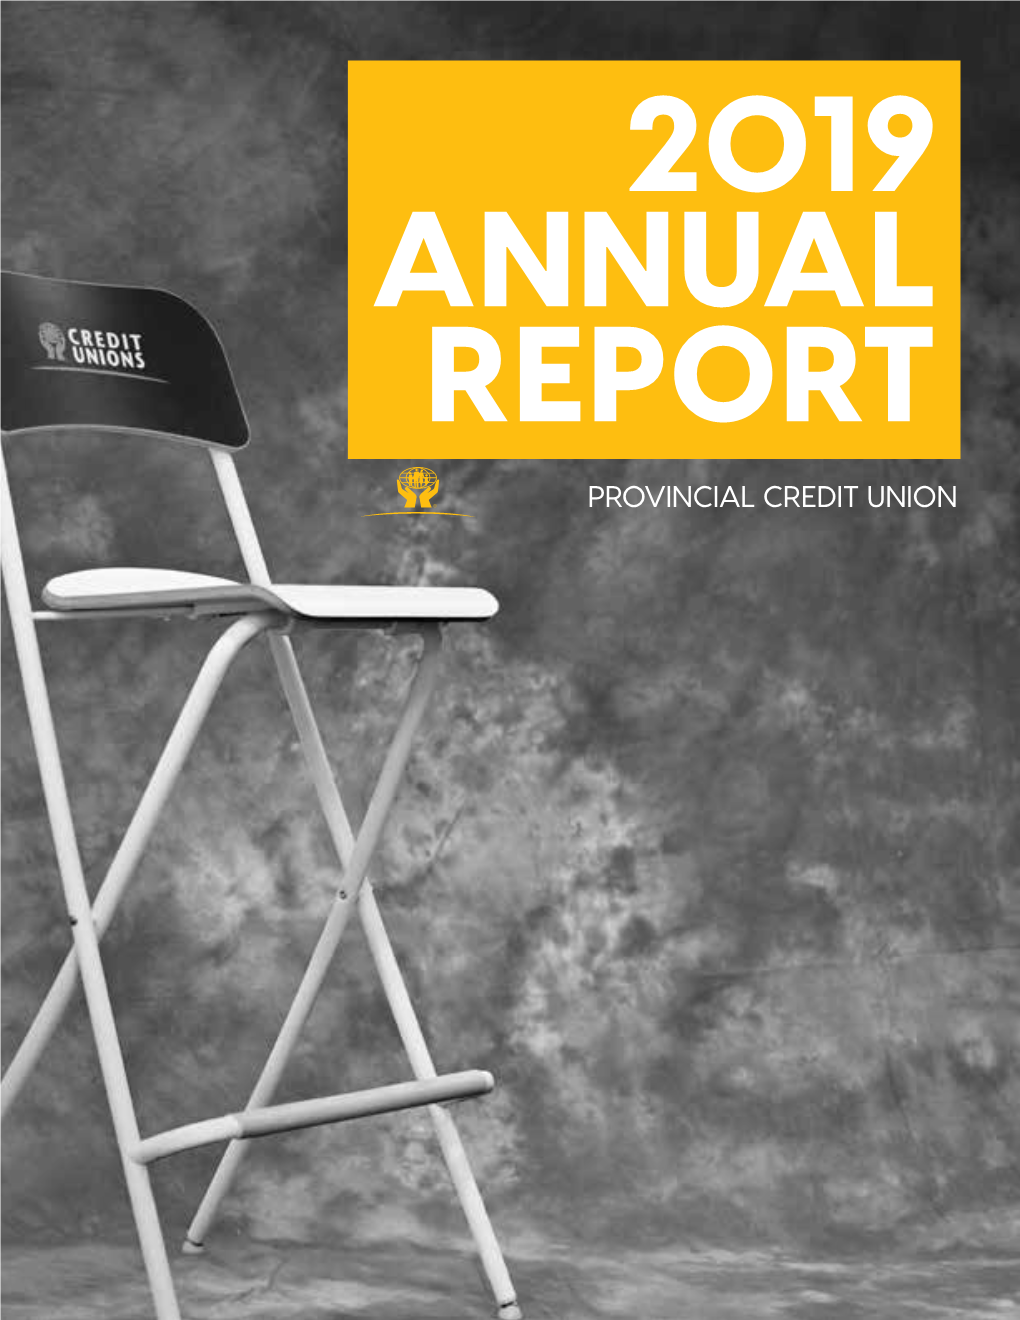 PROVINCIAL CREDIT UNION Table of Contents